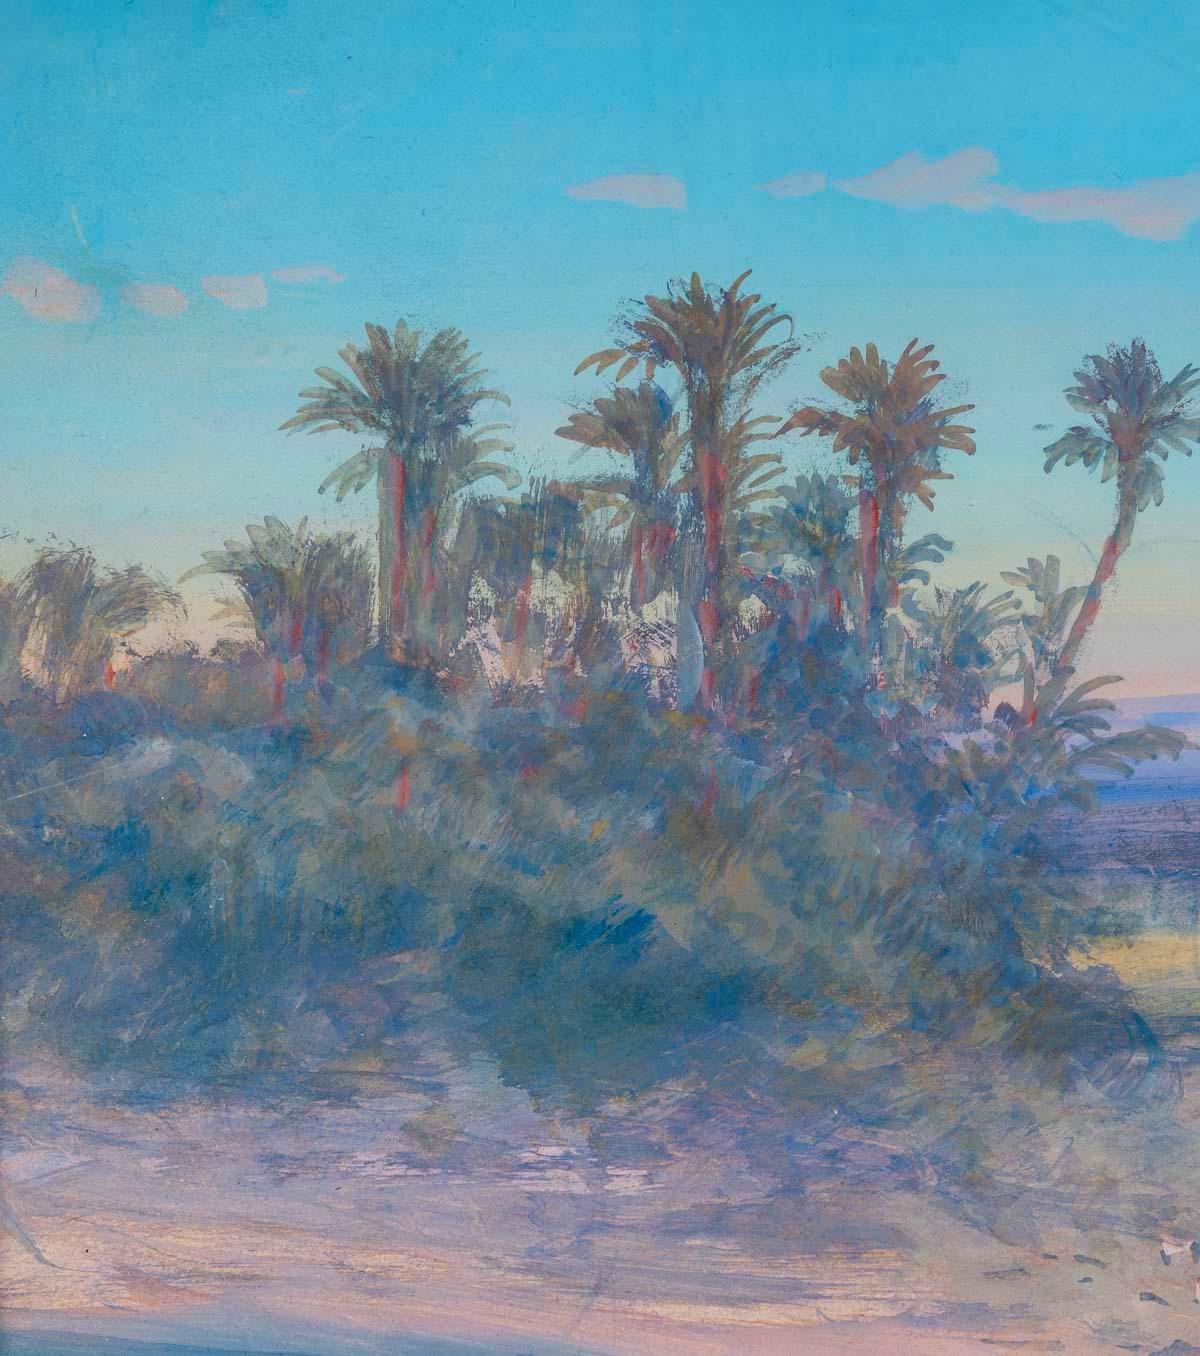 Break at The oasis - Gouache 1903 - Painting by Paul PASCAL